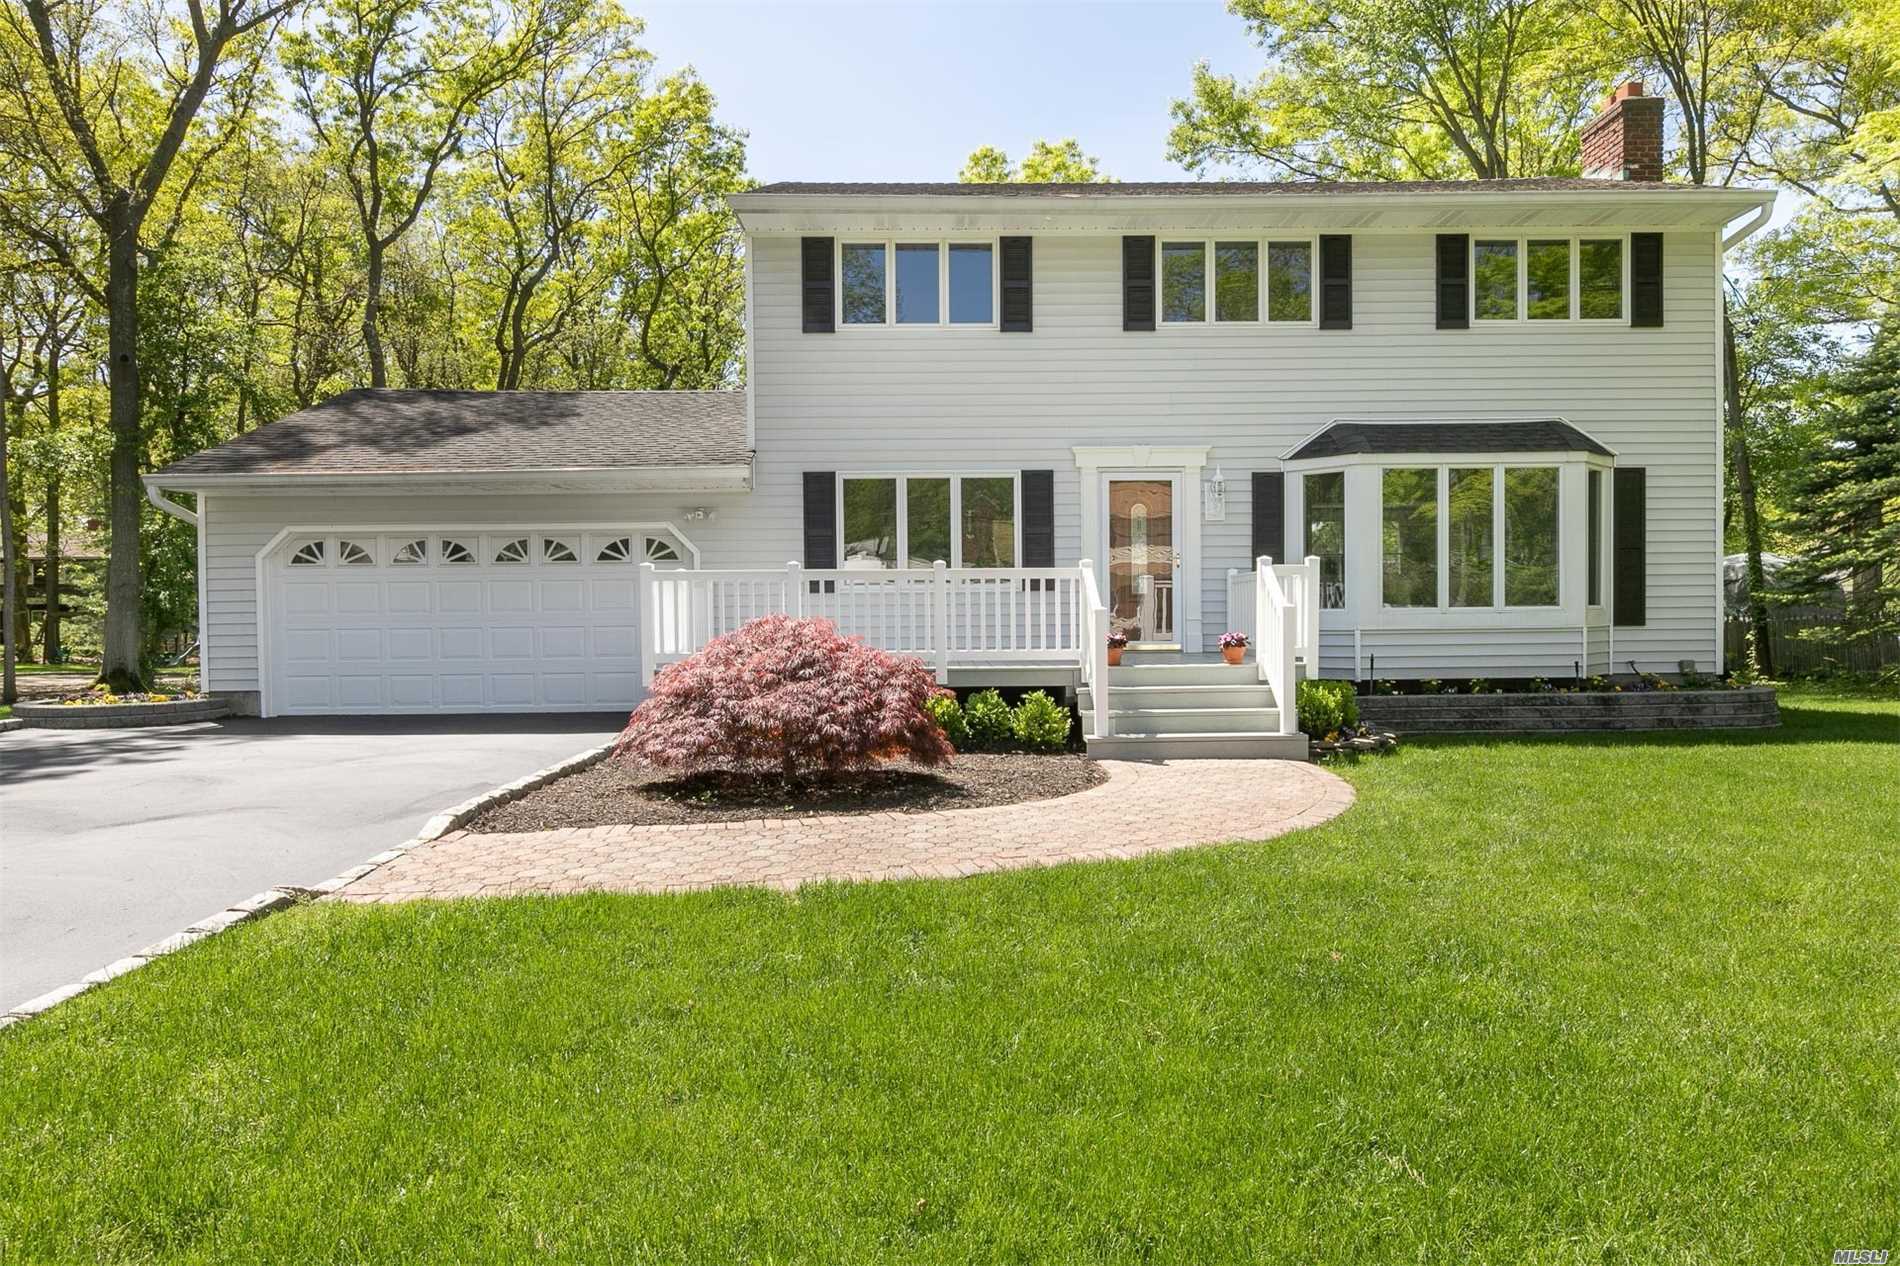 Absolutely perfect 4 bedroom colonial all new kitchen cabinets, granite counters, new appliances, new tile, newly refinished wood floors, all new doors, new bathroom in master, central vac, gunite pool, new patio. Picture perfect must see!